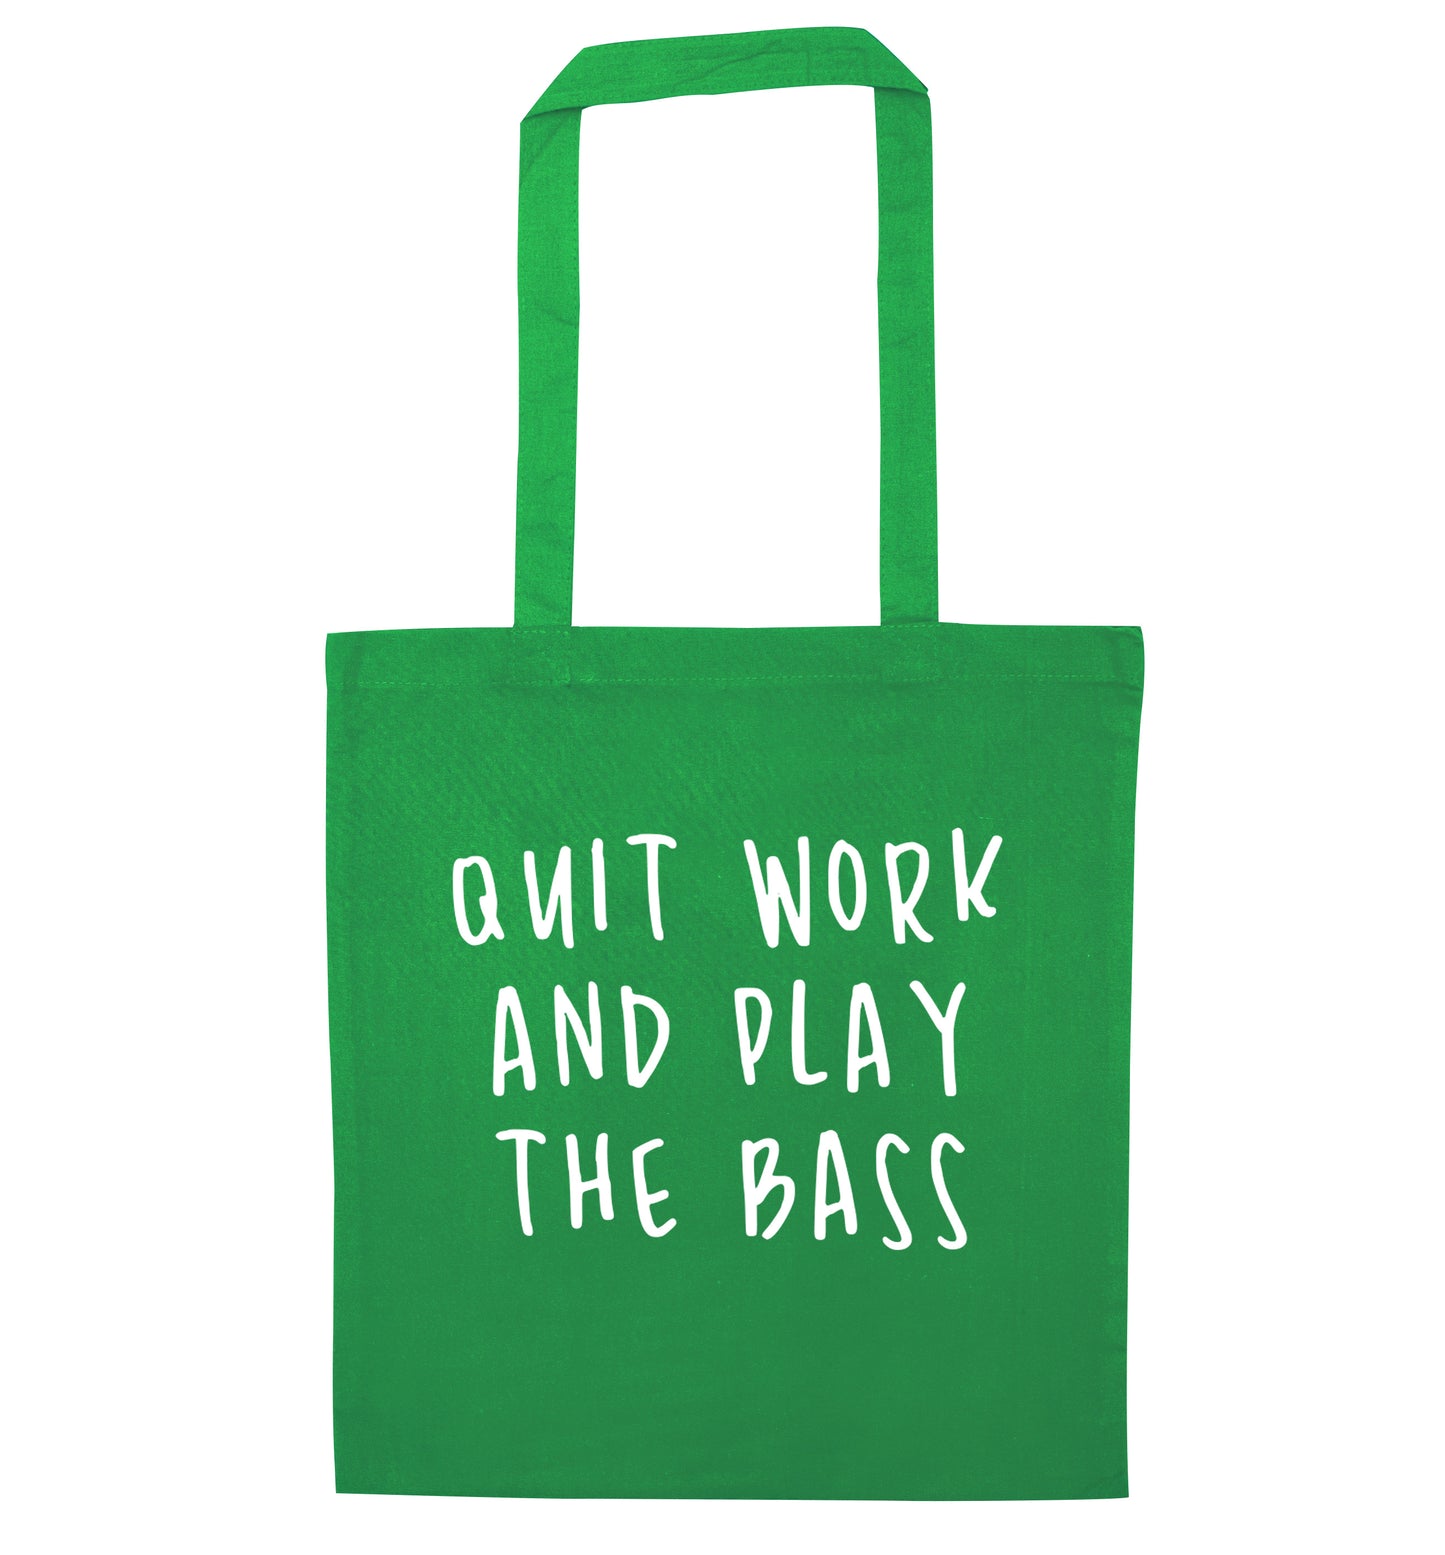 Quit work and play the bass green tote bag